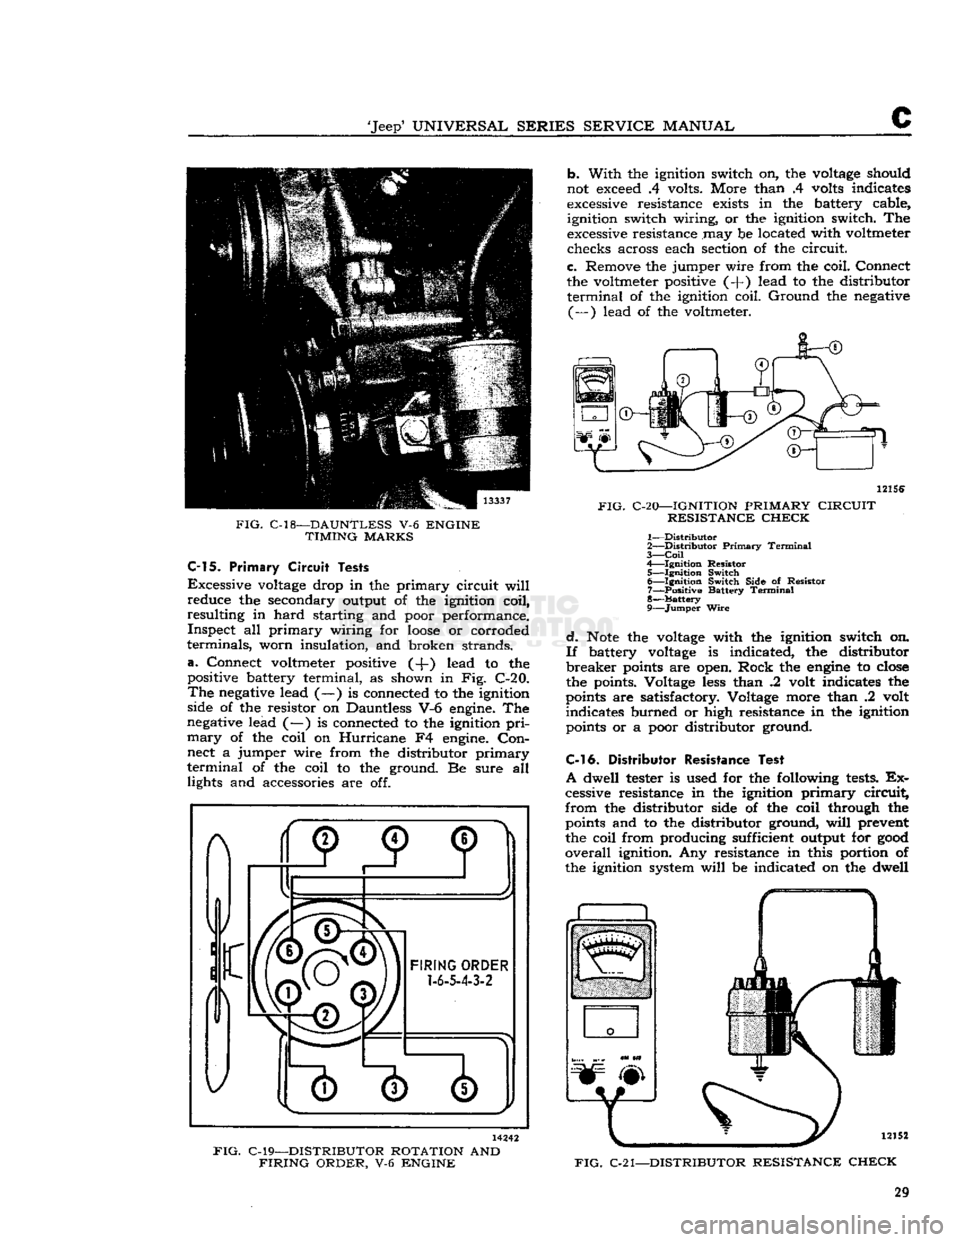 JEEP CJ 1953  Service Manual 
Jeep
 UNIVERSAL
 SERIES
 SERVICE
 MANUAL 

C 

FIG.
 C-18—DAUNTLESS
 V-6
 ENGINE 
 TIMING
 MARKS 
 C-15.
 Primary
 Circuit
 Tests 

Excessive
 voltage
 drop in the primary circuit
 will 

reduce 